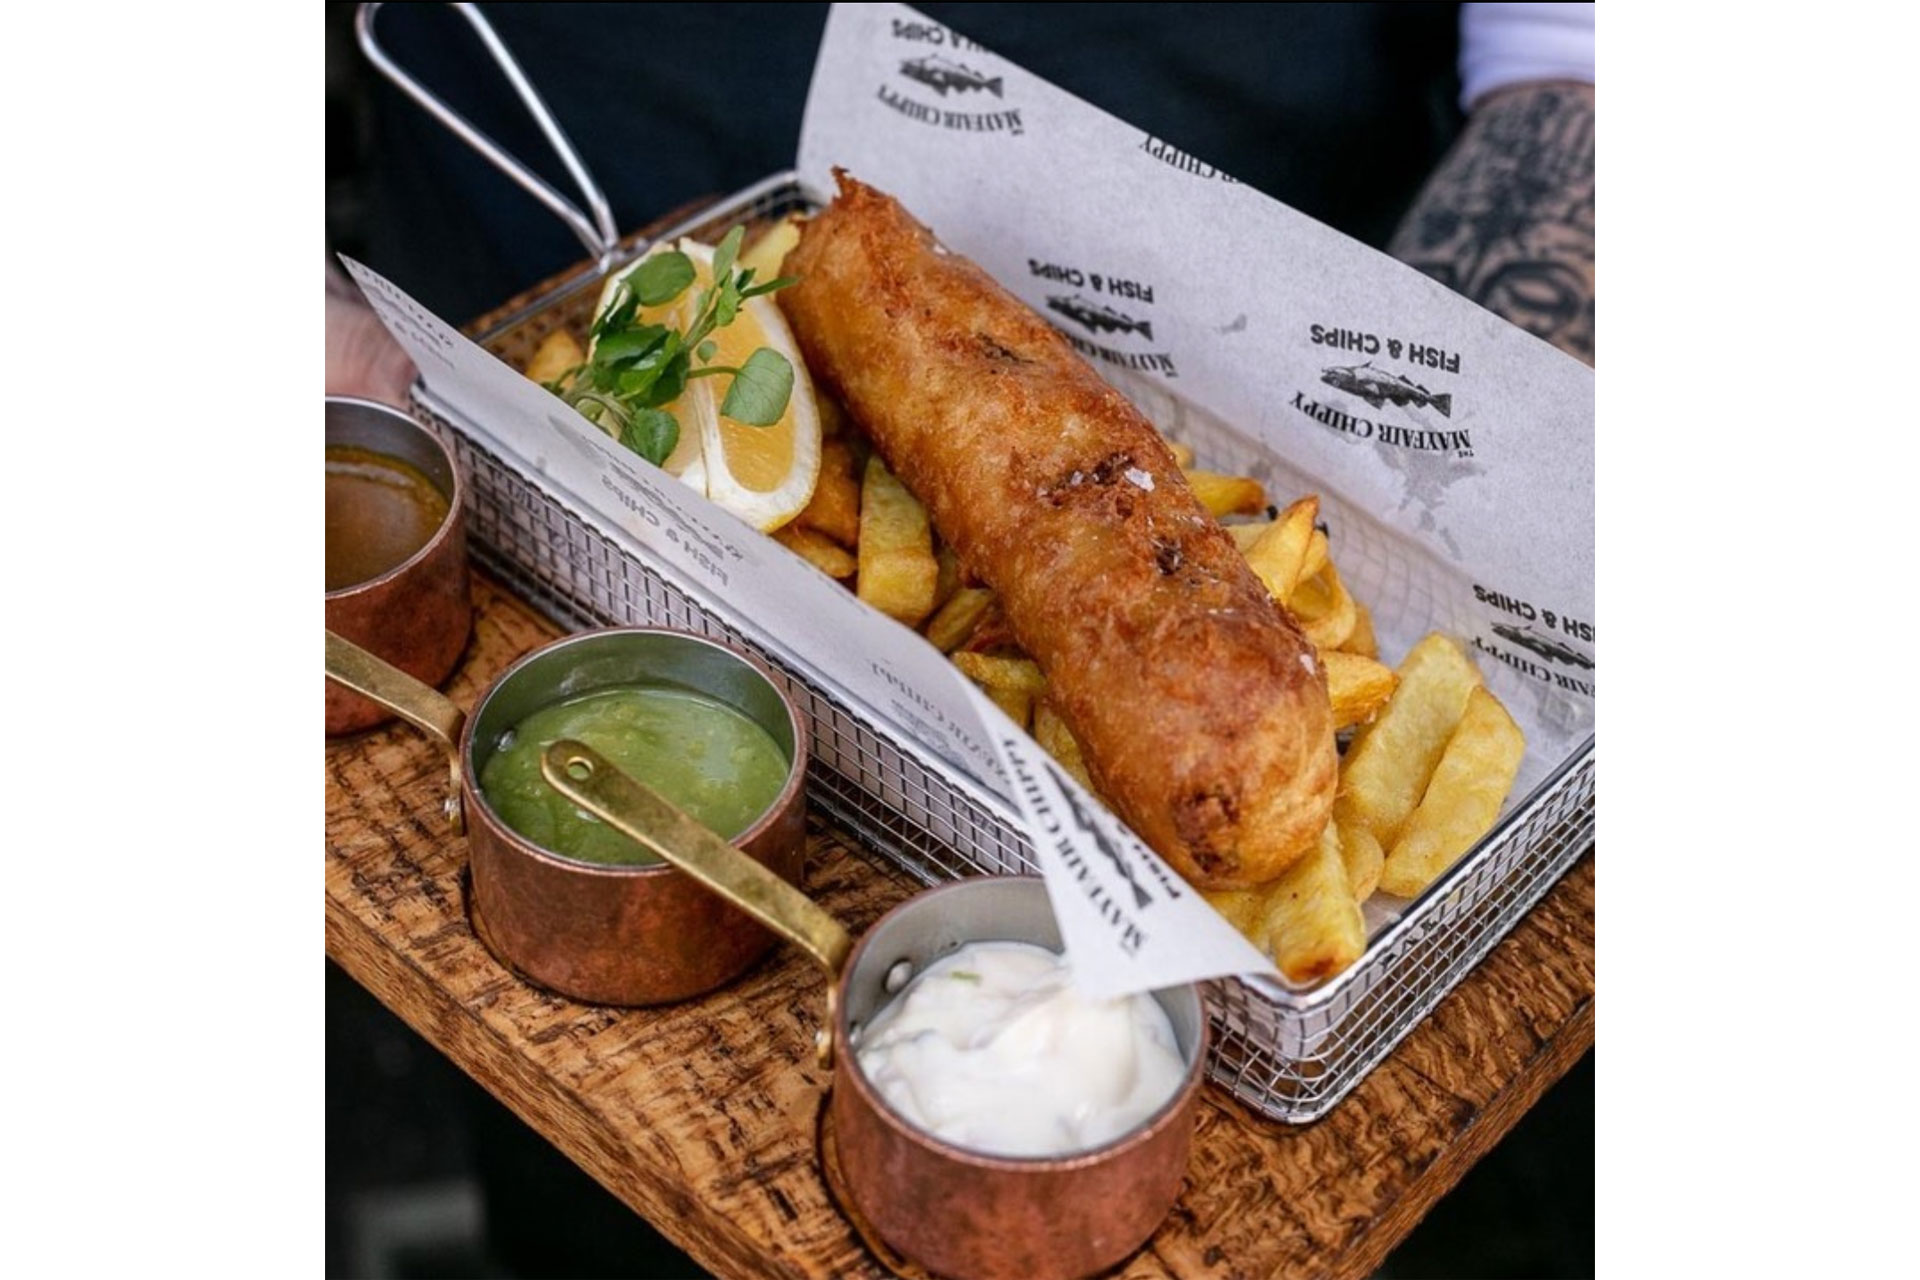 Vegan fish and chips at The Mayfair Chippy